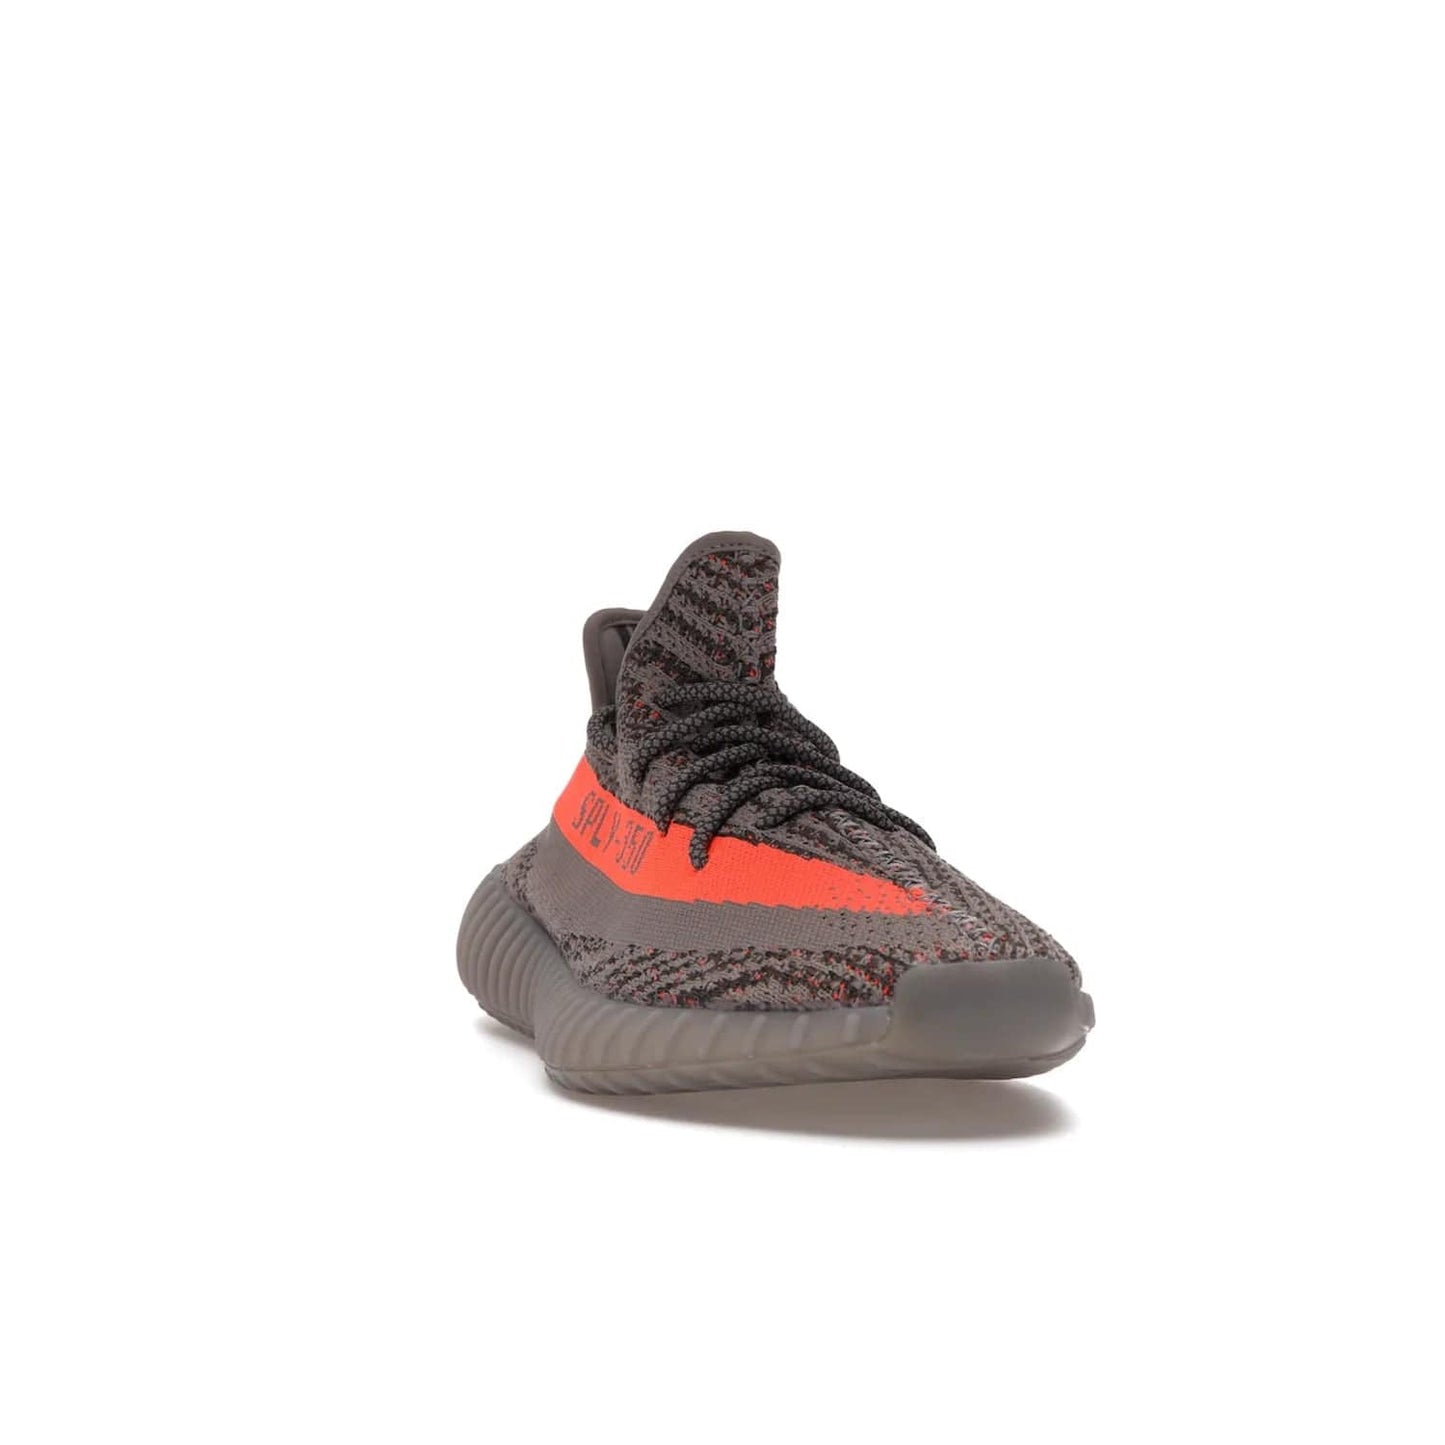 adidas Yeezy Boost 350 V2 Beluga Reflective - Image 8 - Only at www.BallersClubKickz.com - Shop the adidas Yeezy Boost 350 V2 Beluga Reflective: a stylish, reflective sneaker that stands out. Featuring Boost sole, Primeknit upper & signature orange stripe. Available Dec 2021.